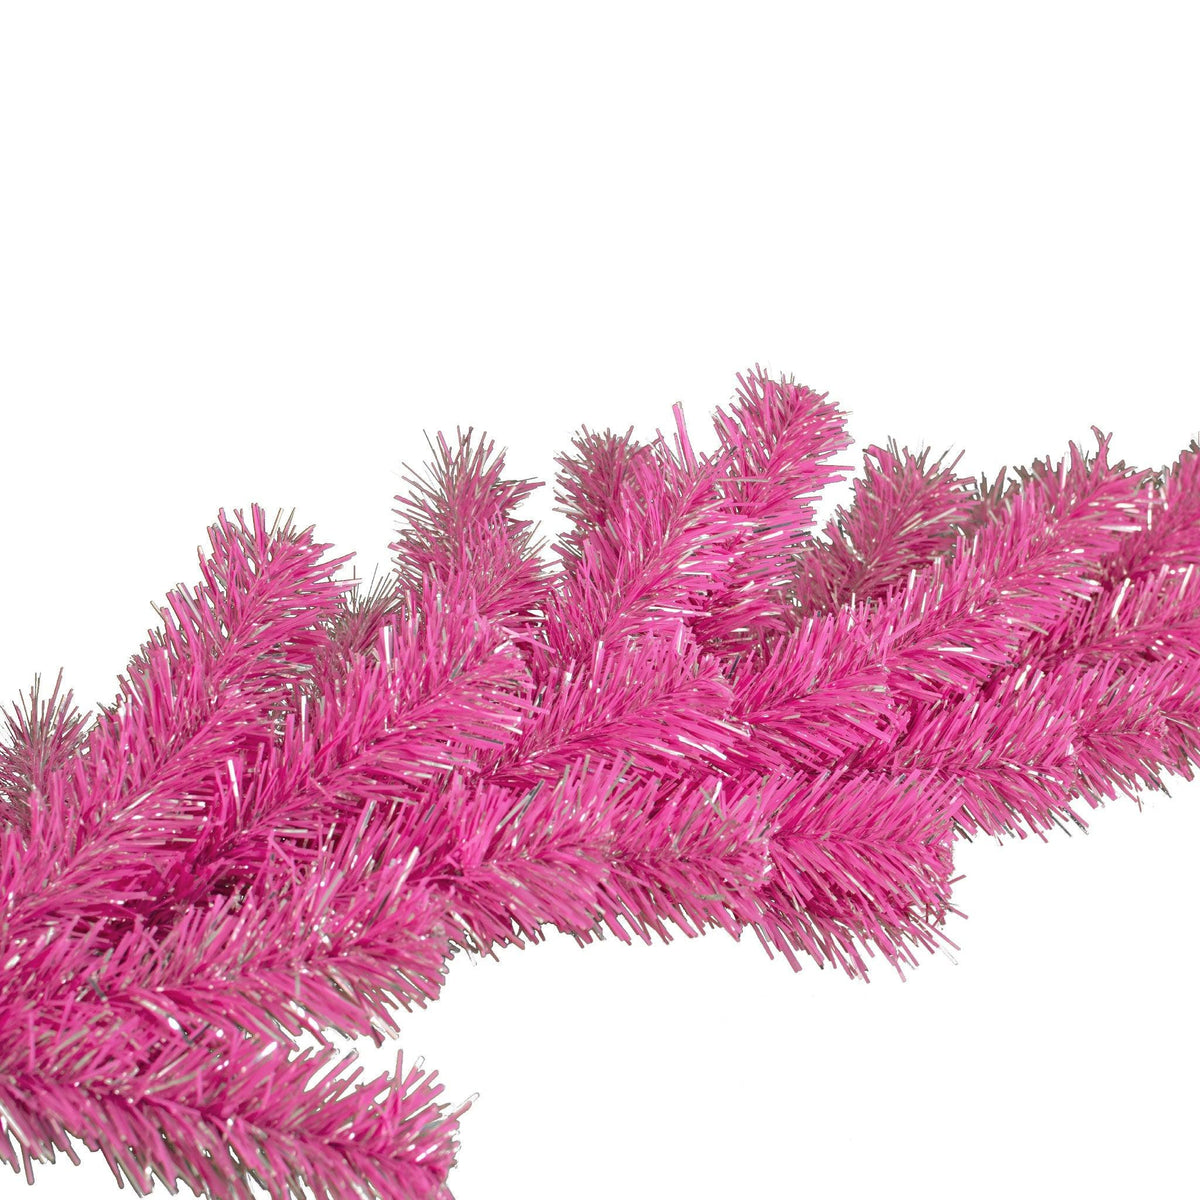   Shop for Lee Display's brand new 6FT Pink and Silver Tinsel Brush Garlands on sale now at leedisplay.com. Photo of garland sitting on a table